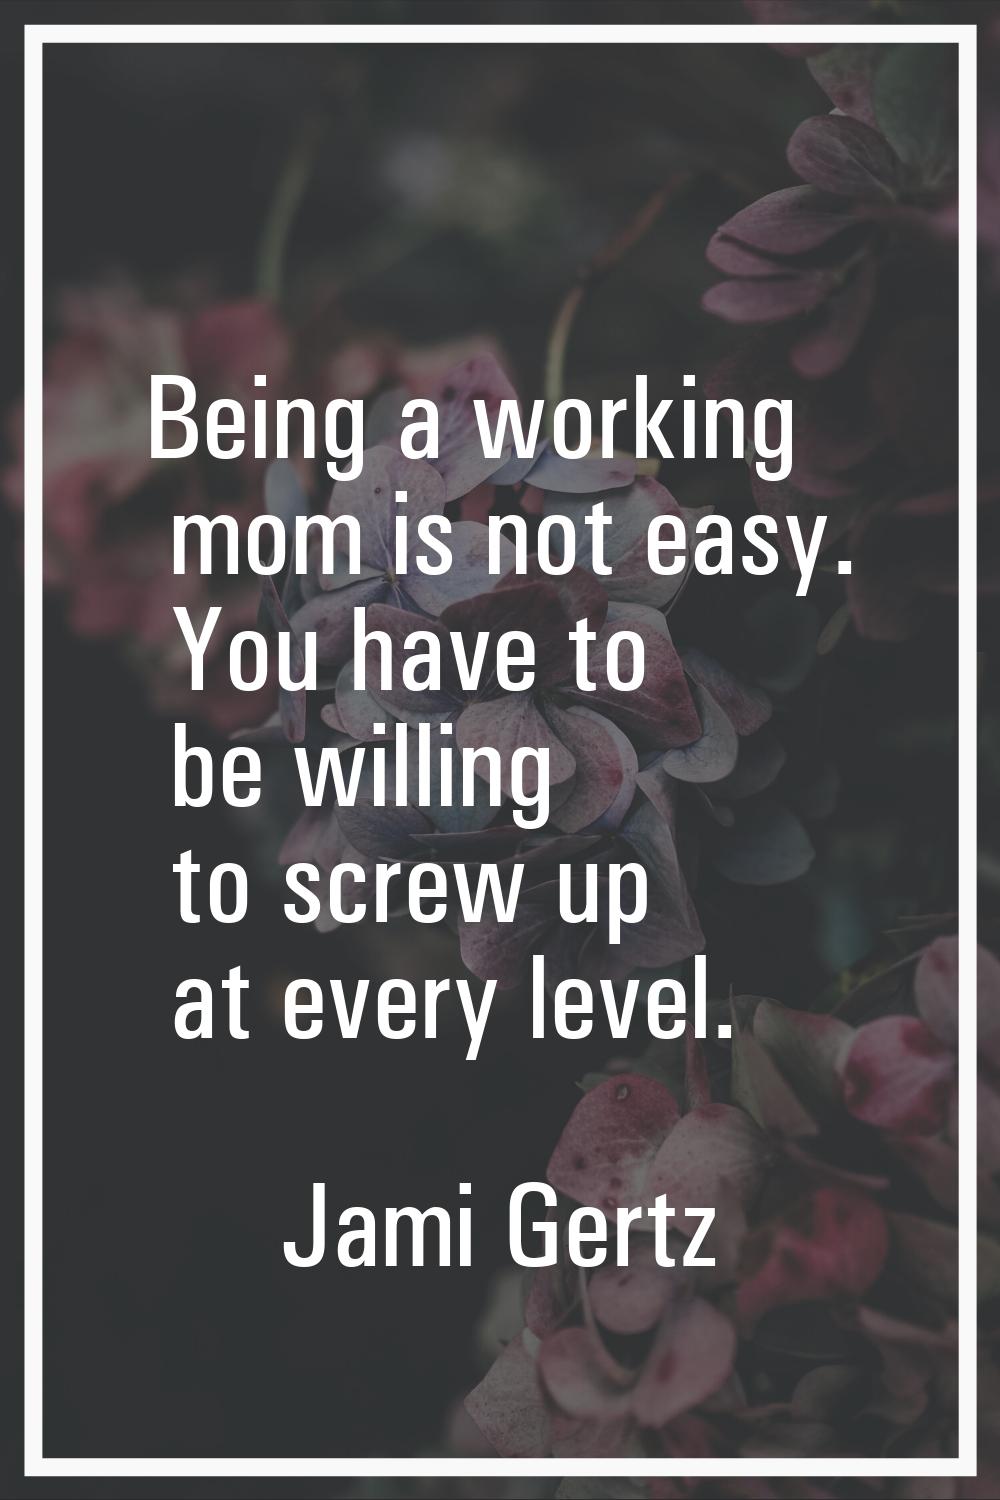 Being a working mom is not easy. You have to be willing to screw up at every level.